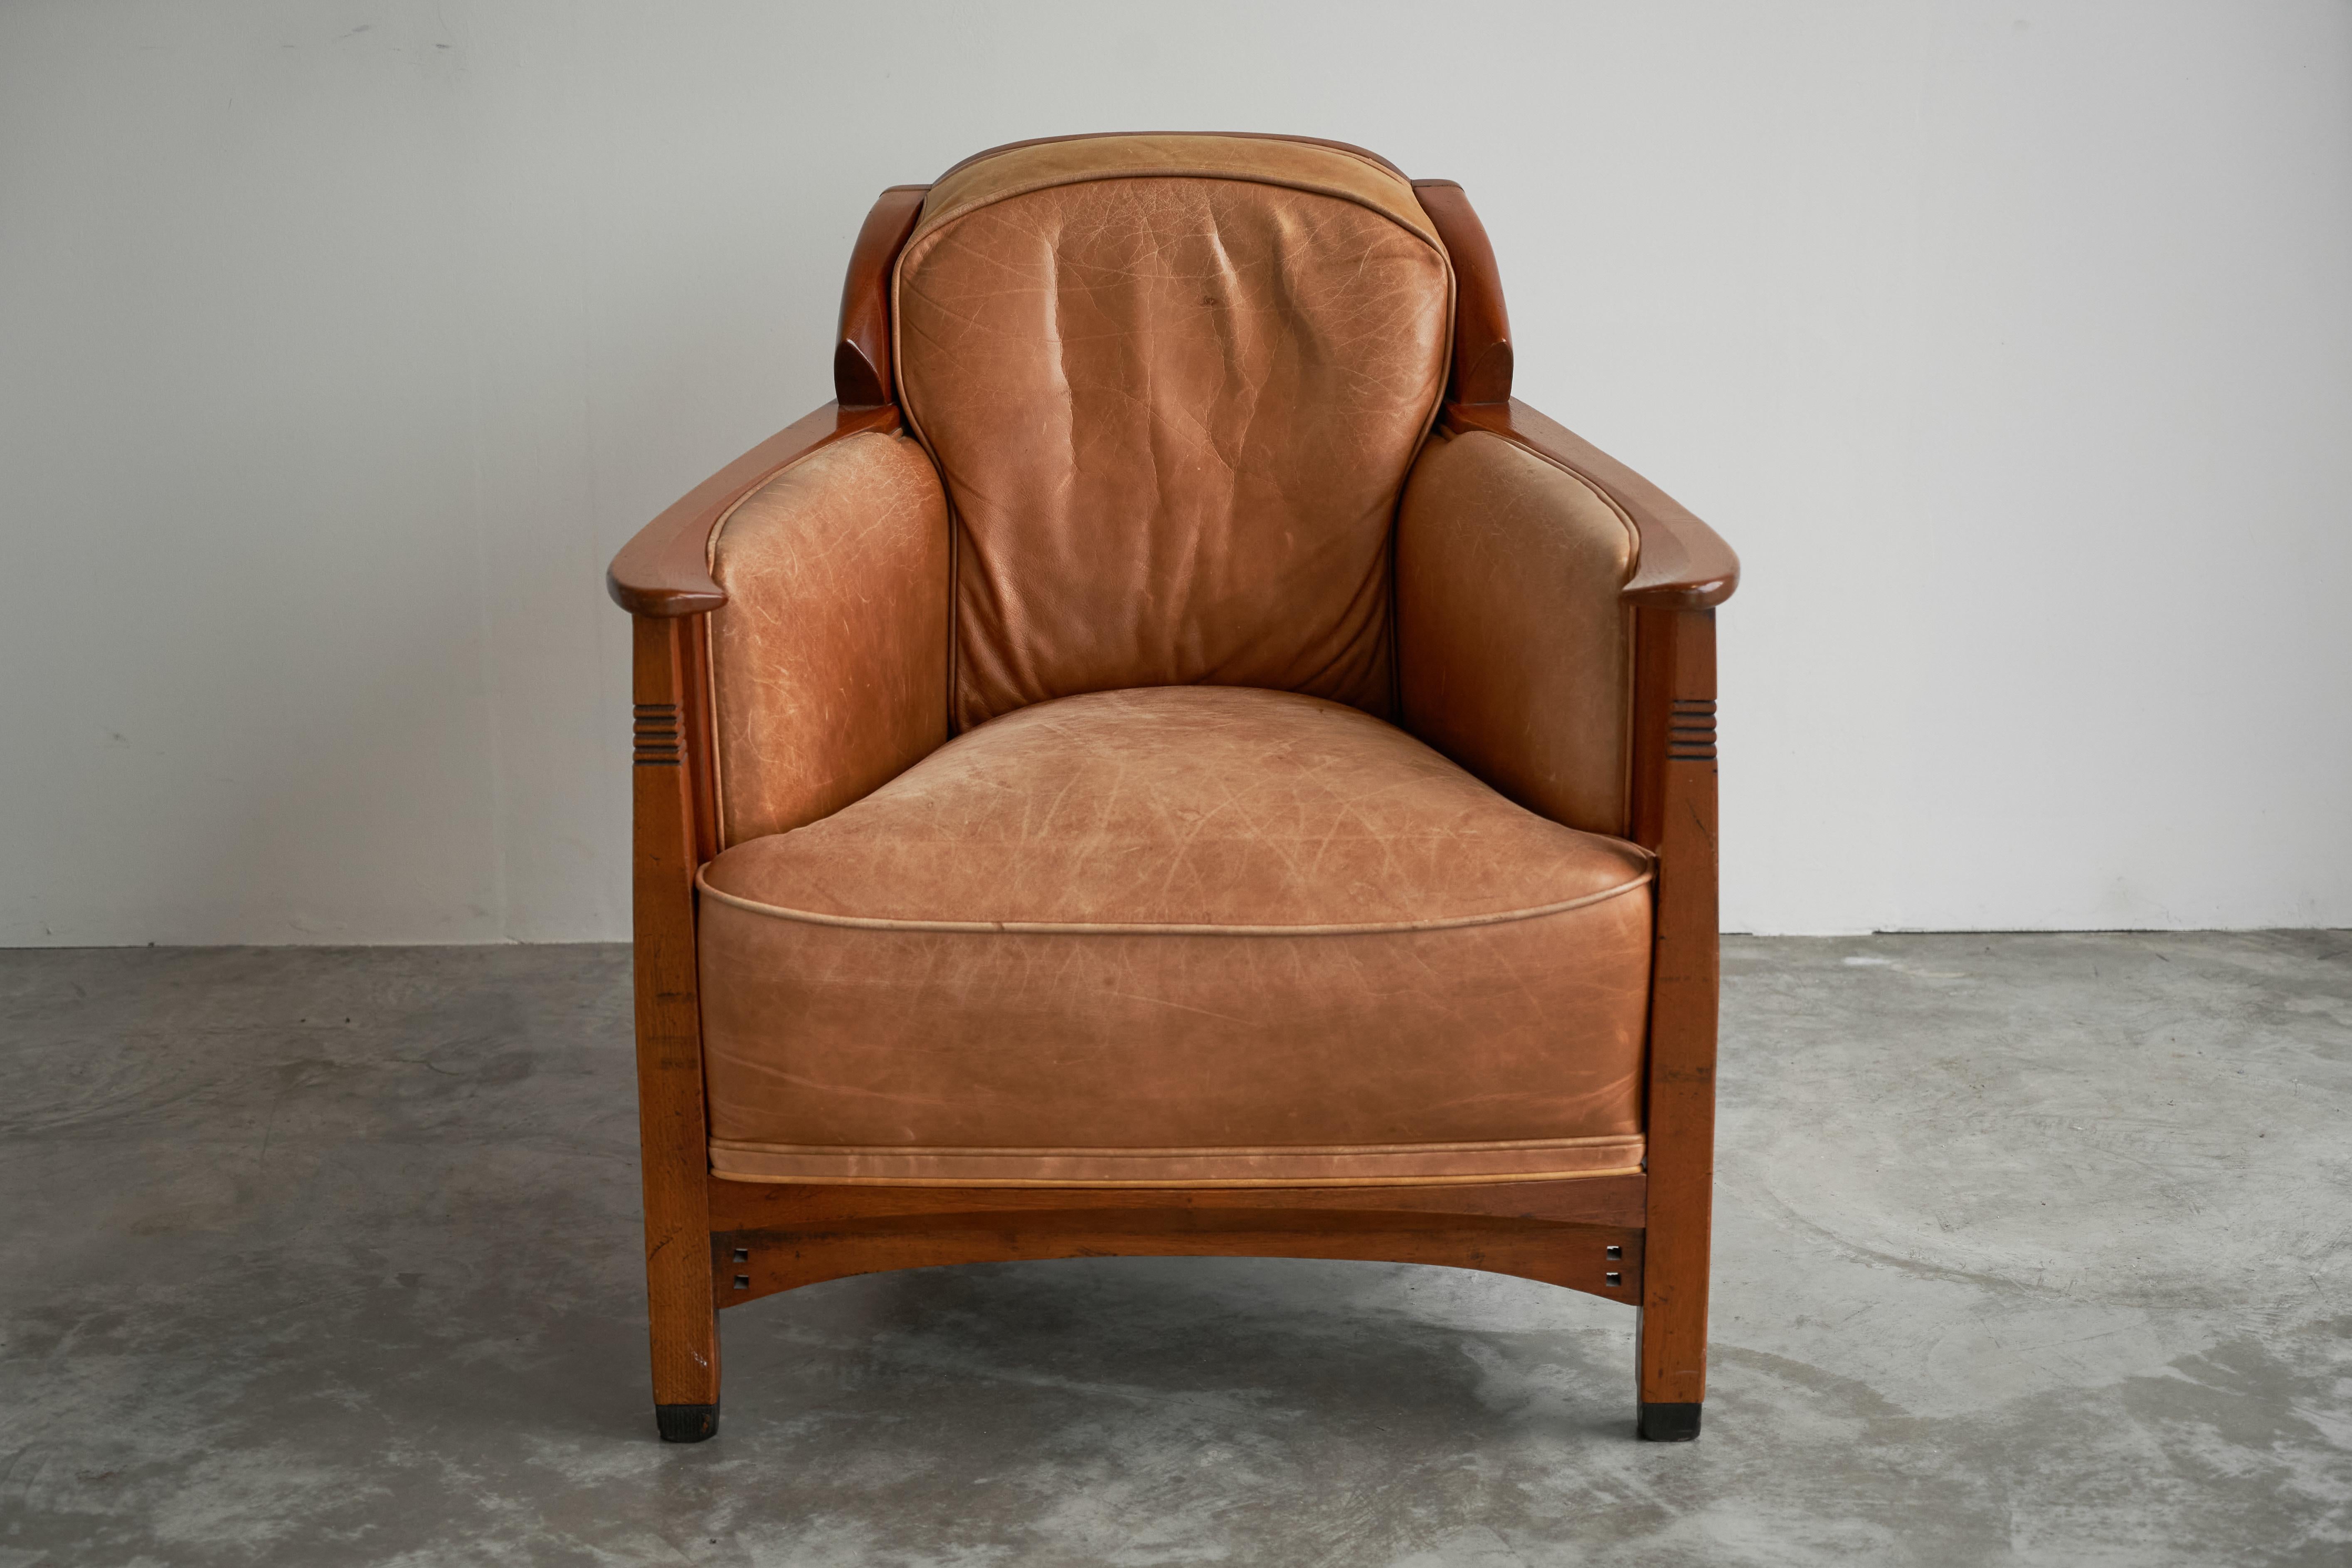 Hand-Crafted Frits Schuitema Art Deco Armchair in Solid Oak and Cognac Leather For Sale